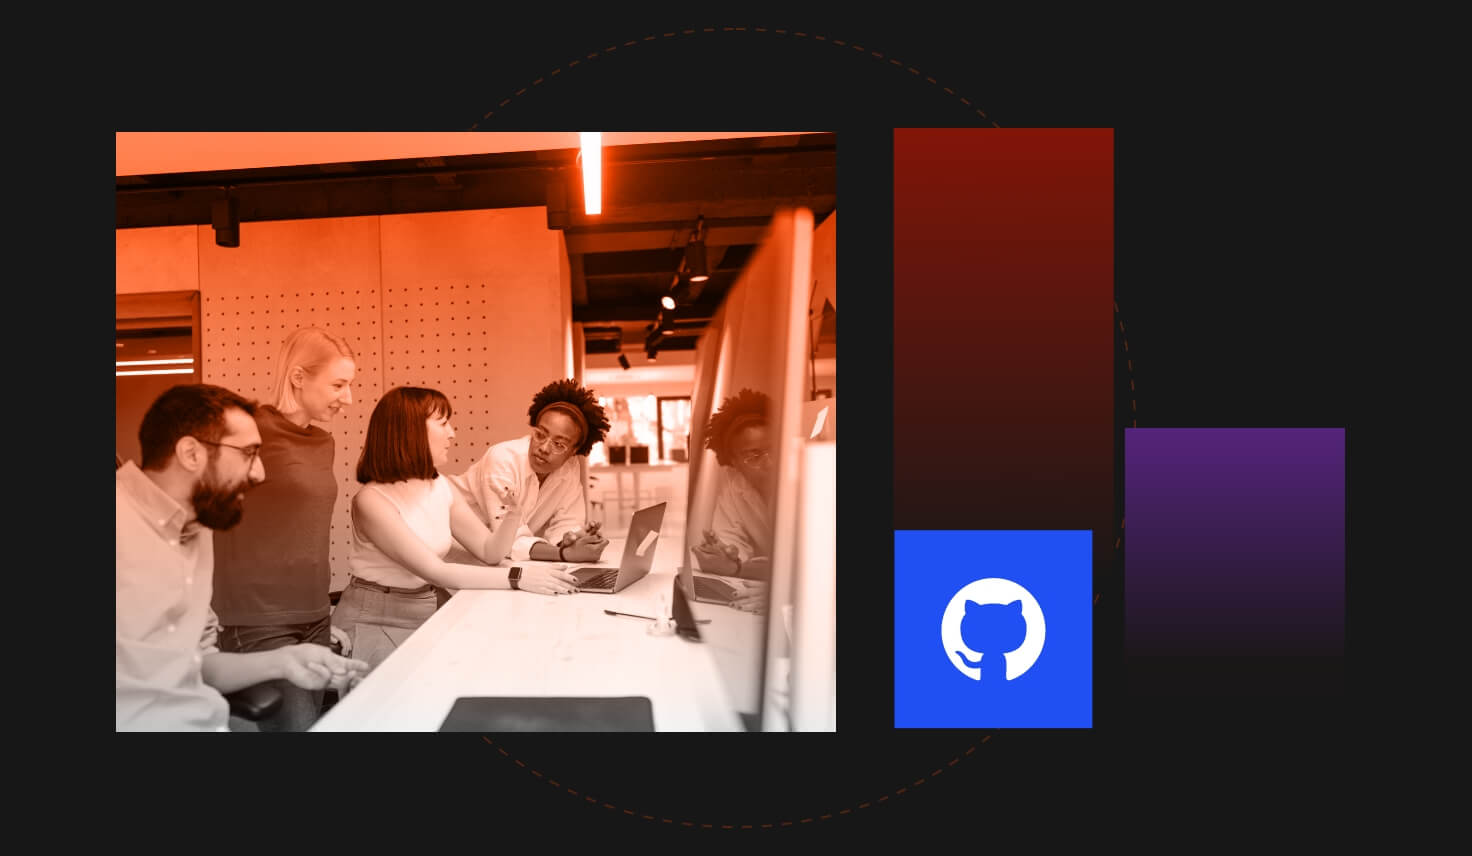 Collage of employees working together with colored boxes and github logo